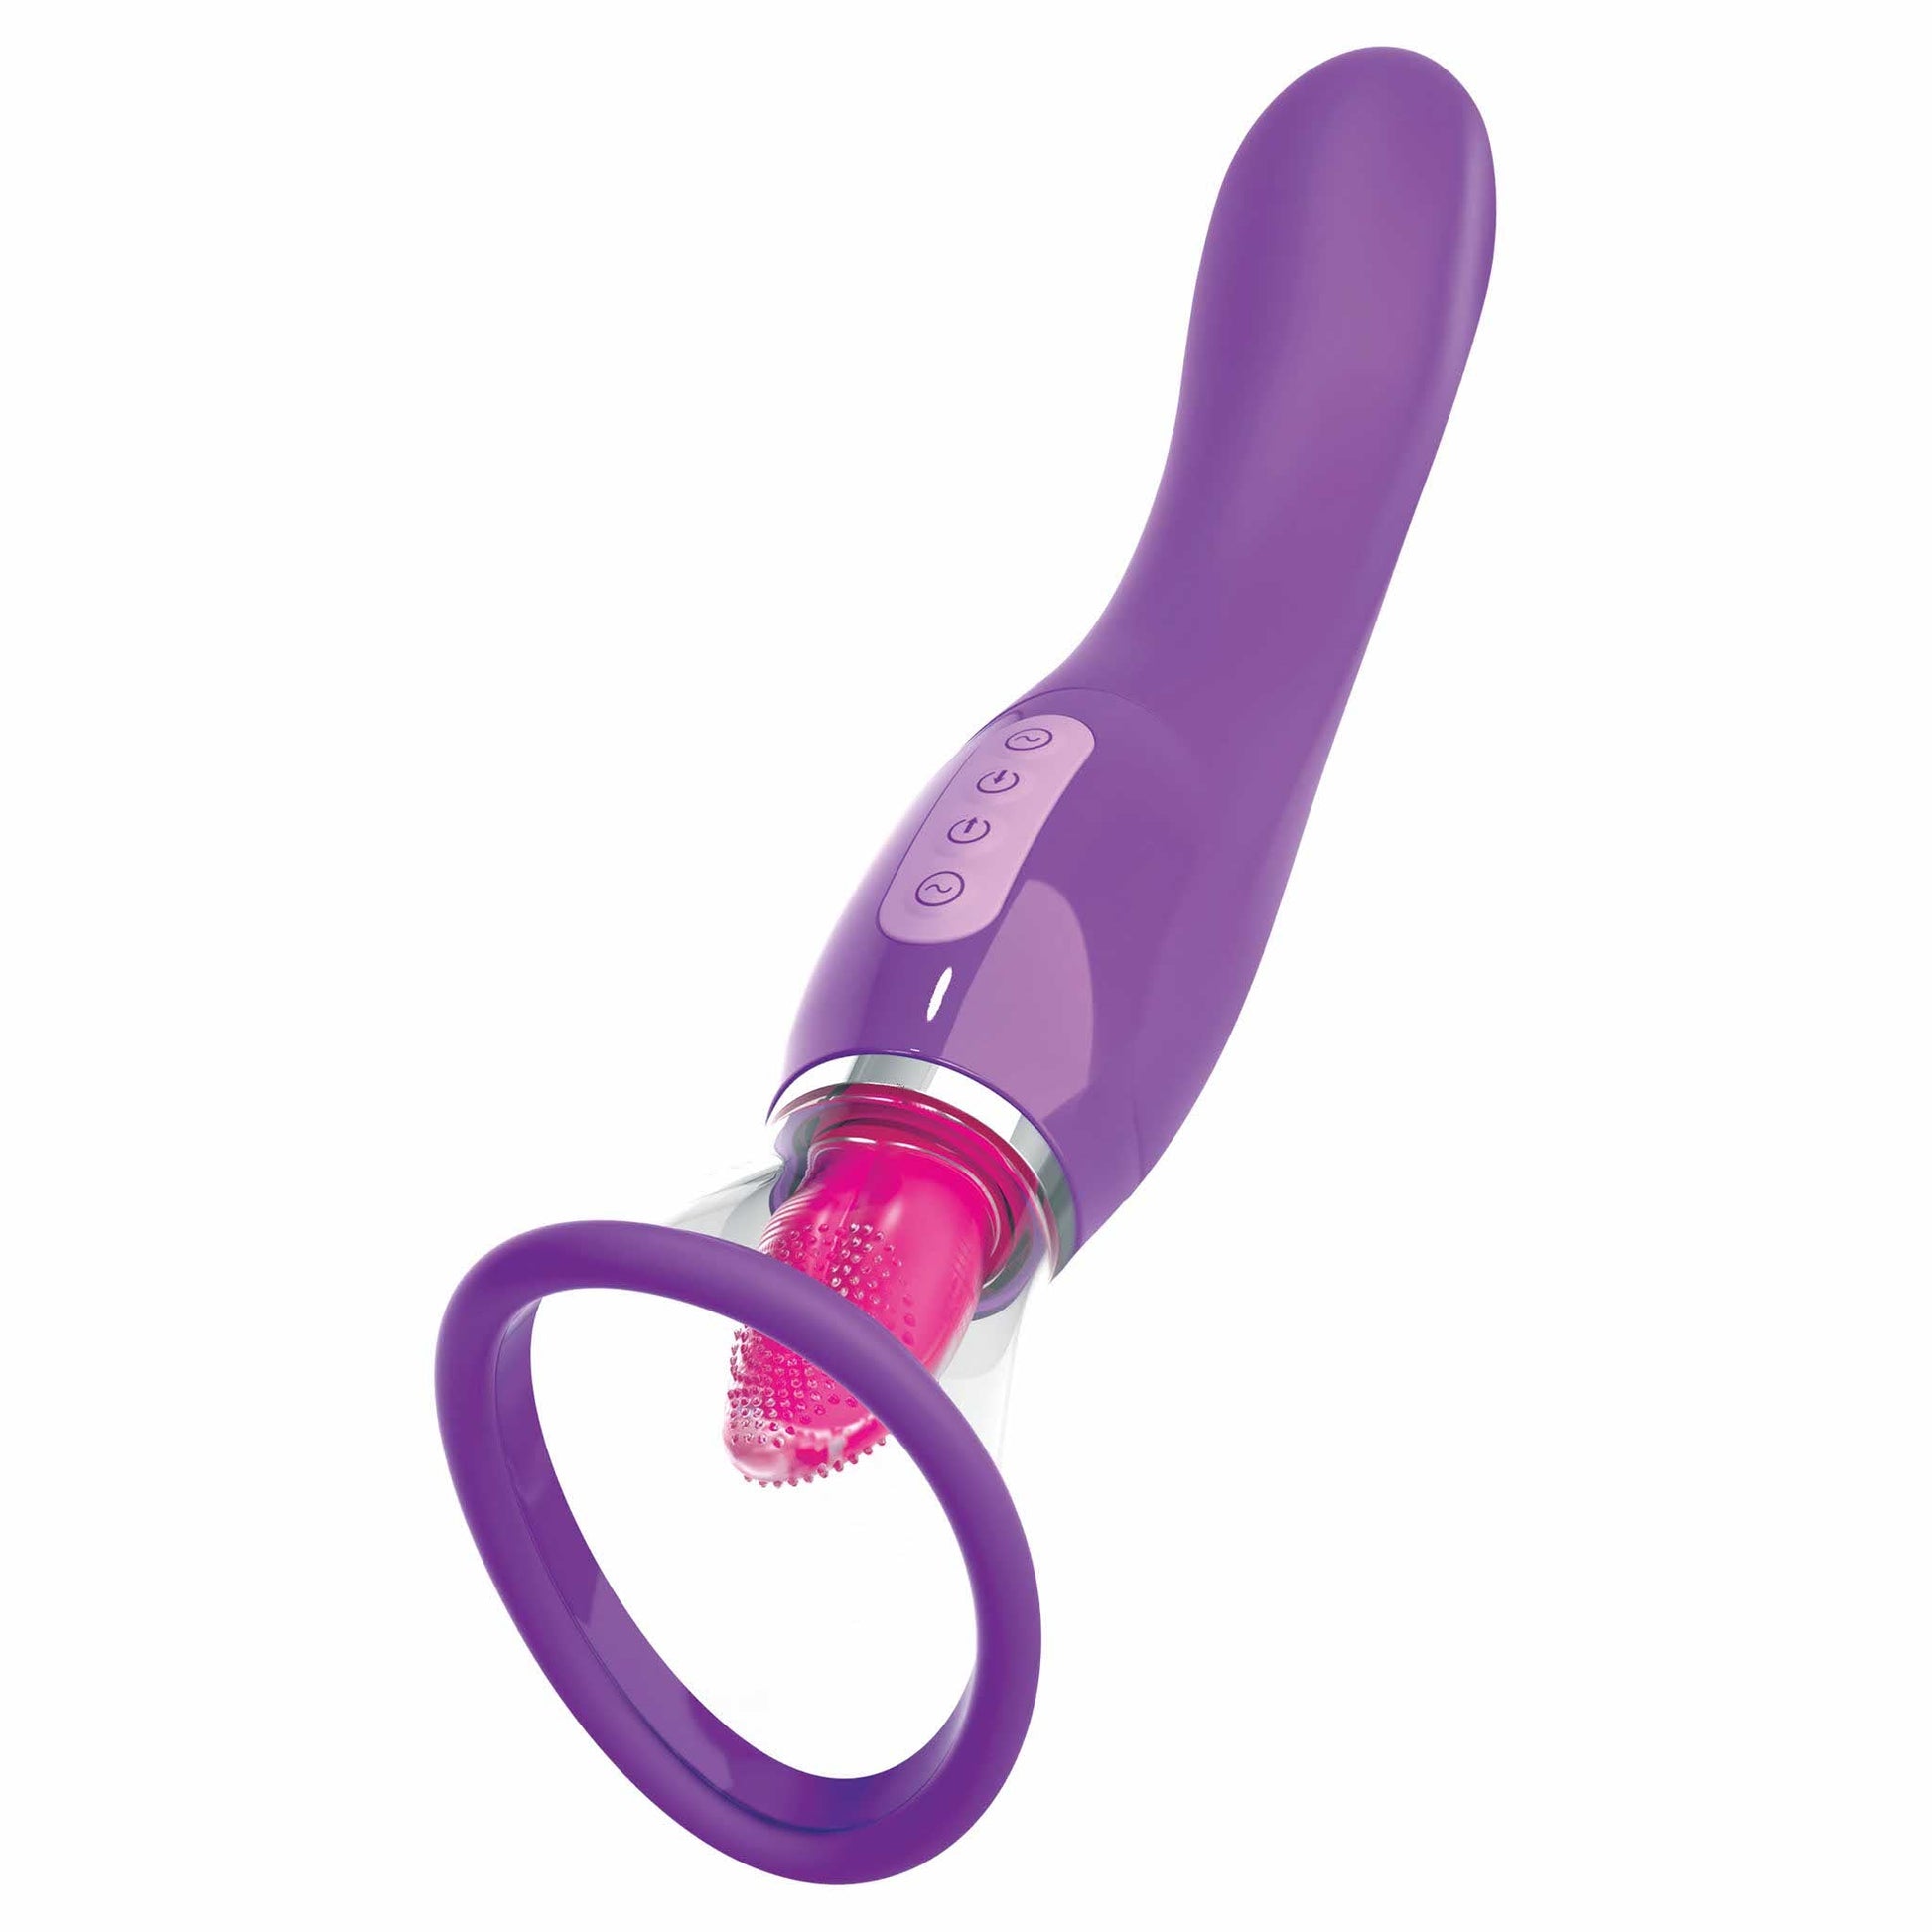 angled view of the fantasy for her ultimate pleasure dual oral vibrator pd4943-12 purple